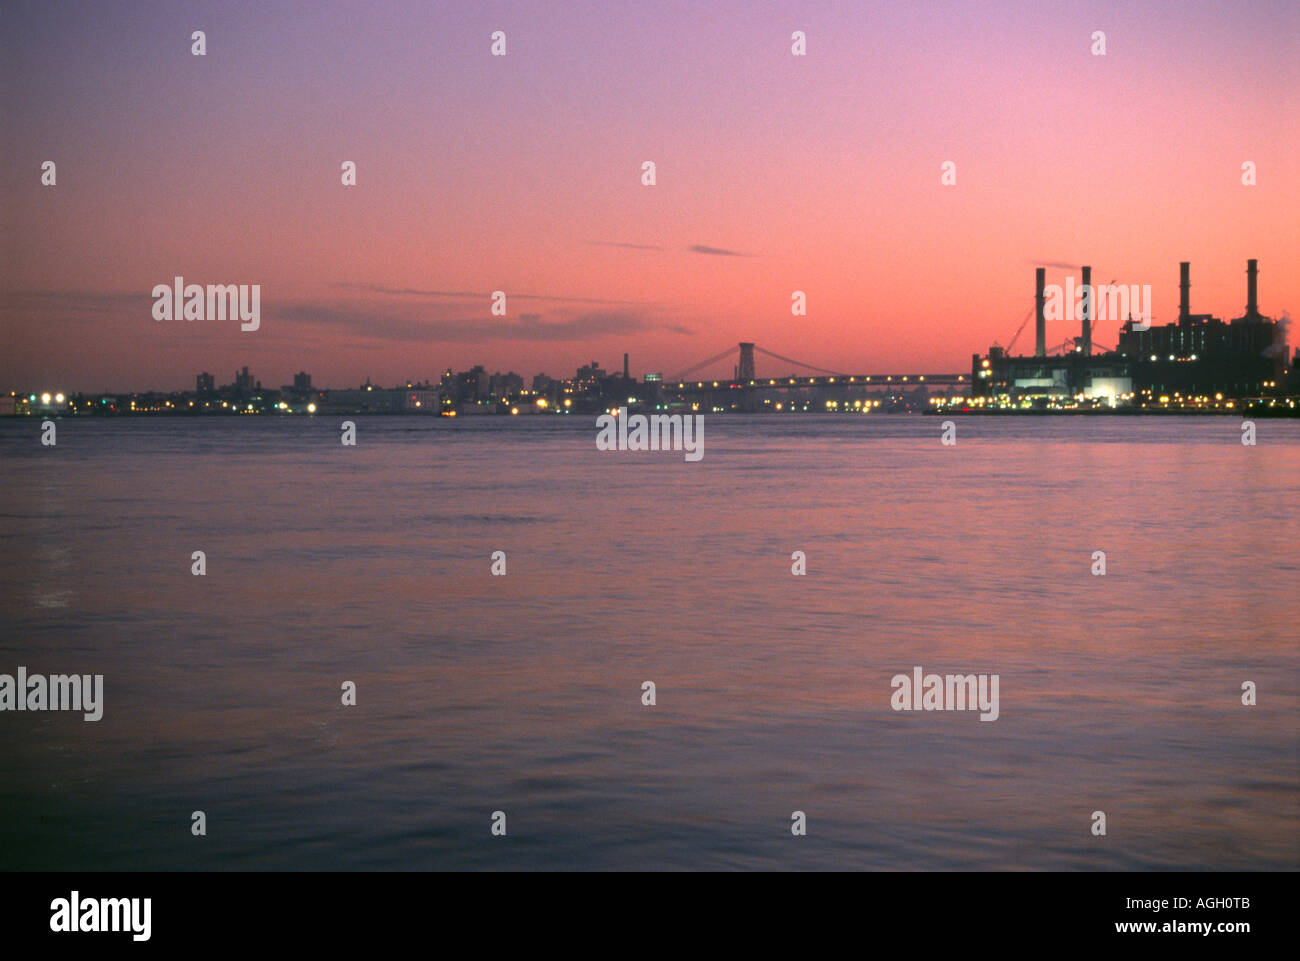 A view of the East river in New York City with the Con edison plant at East 14th Street at sunset. Stock Photo